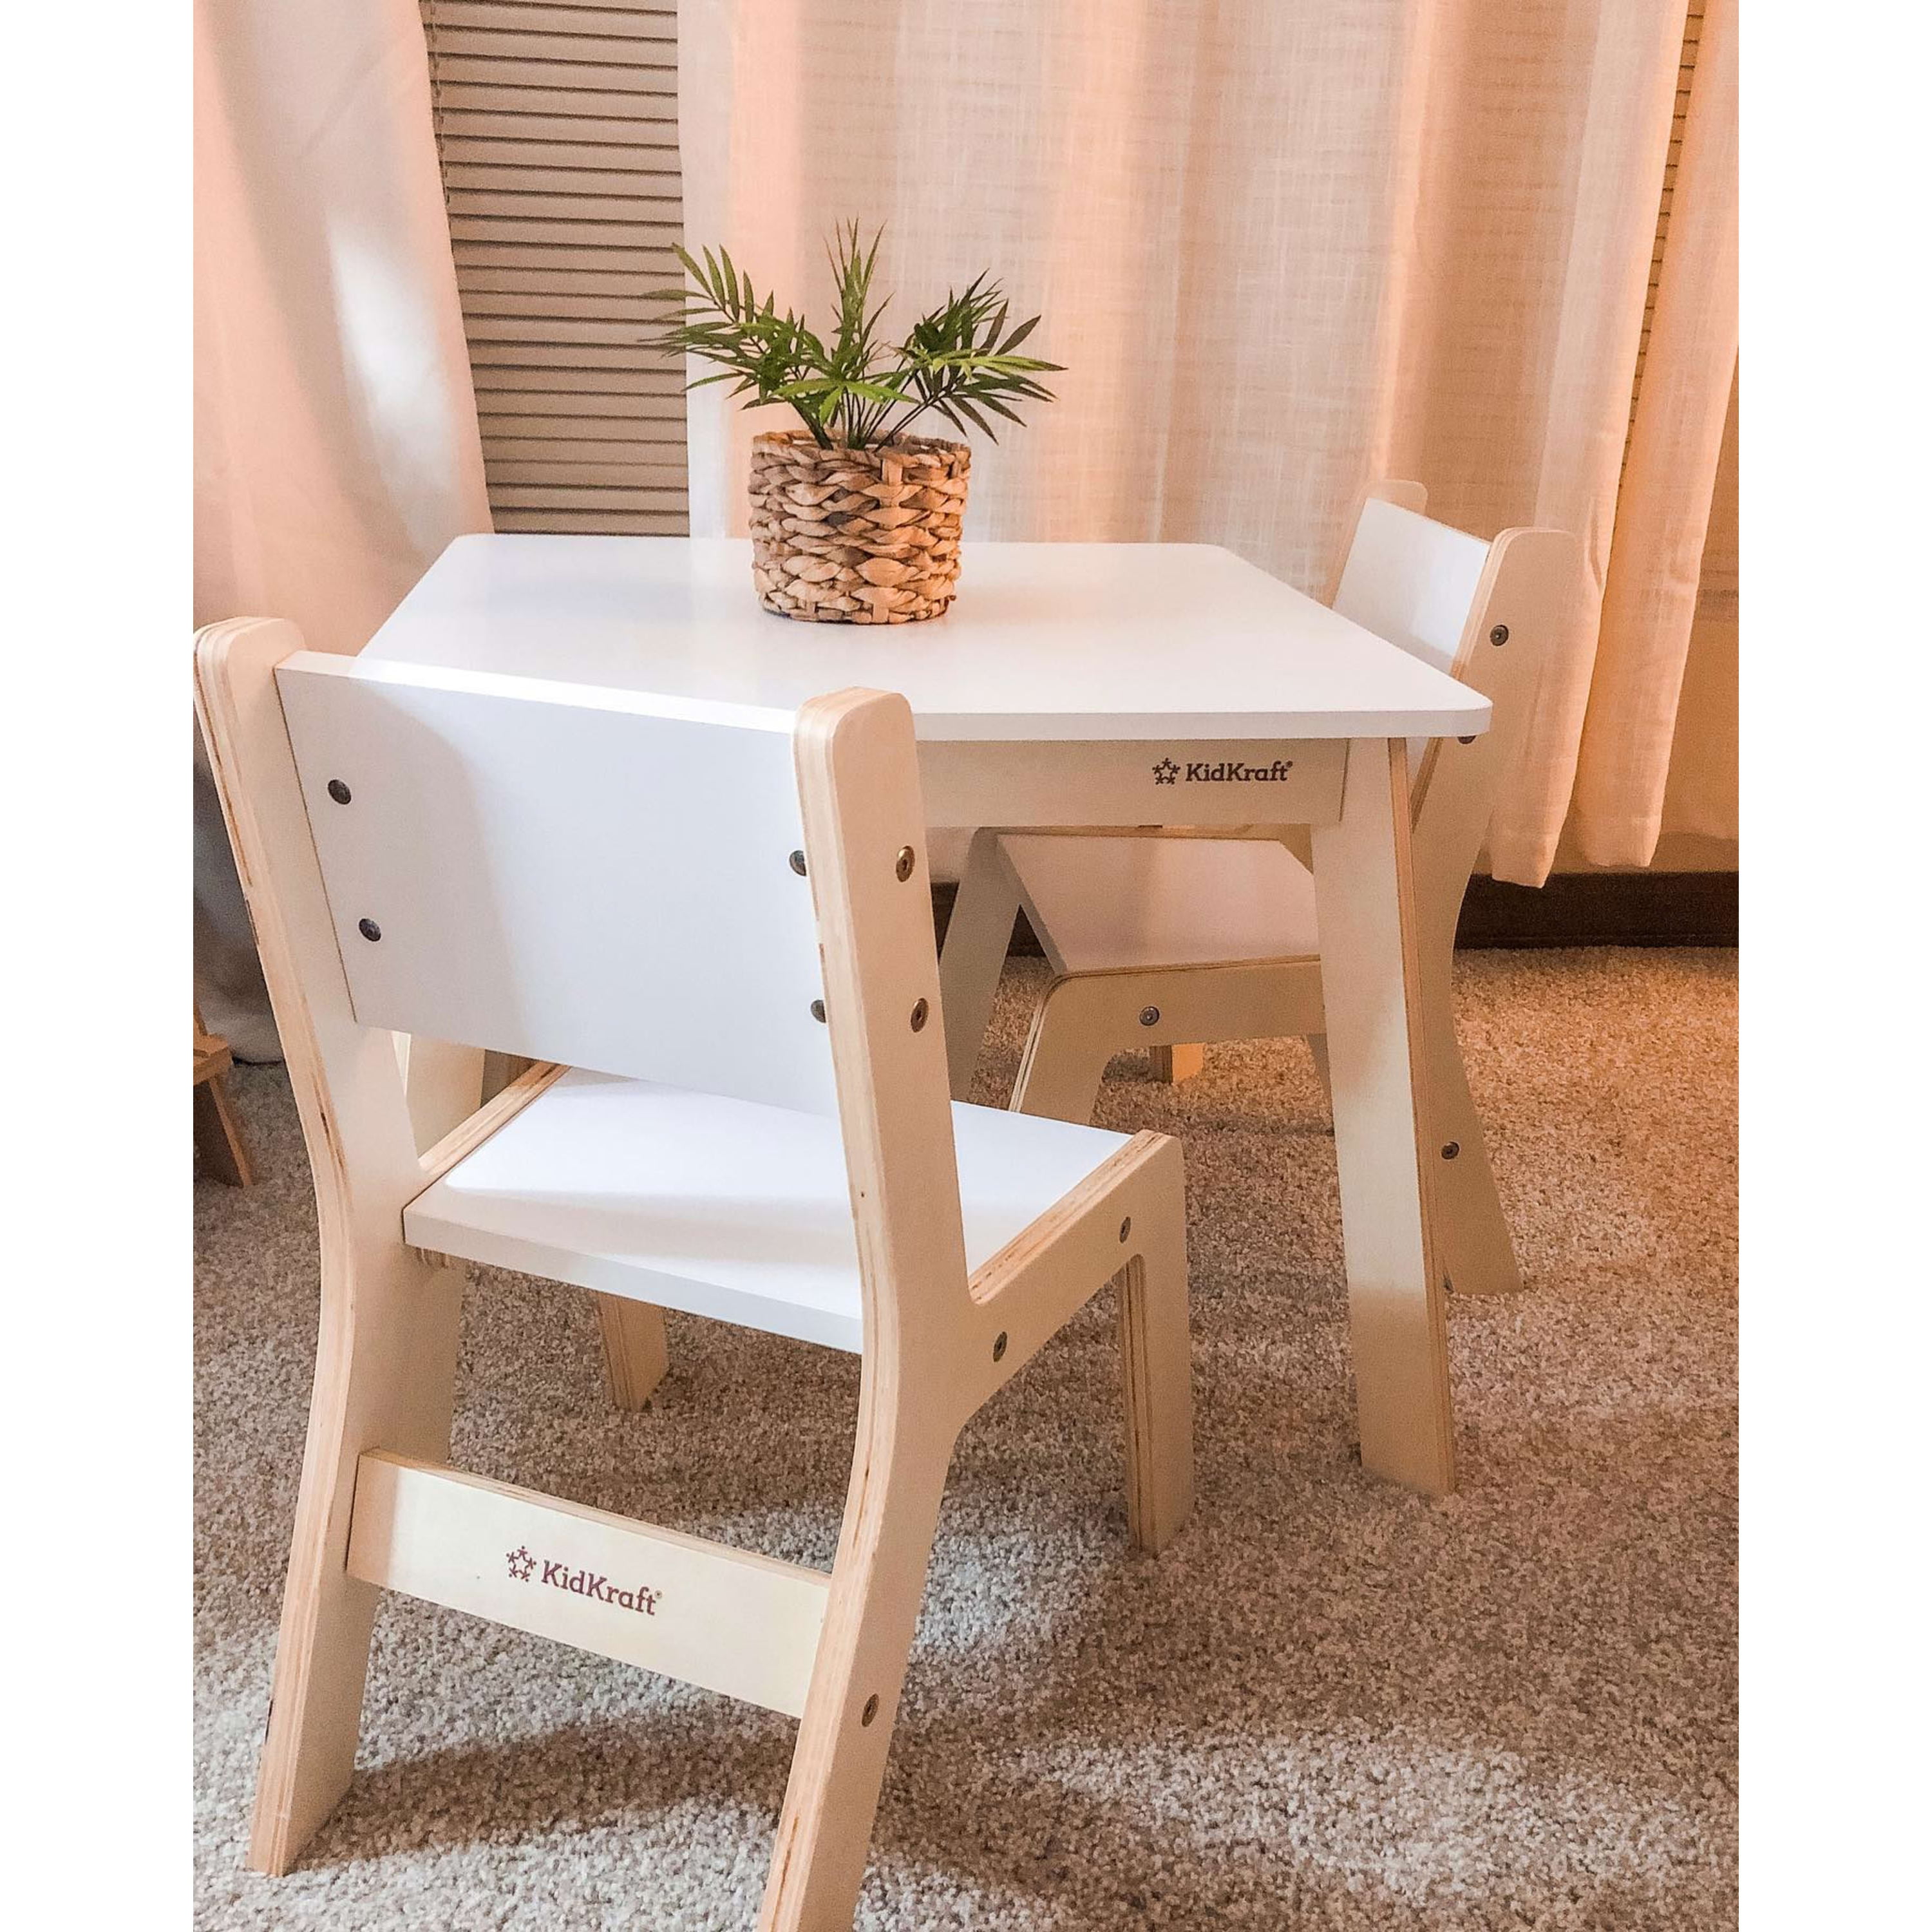 Contemporary table and chair set - FARMHOUSE - Pottery Barn Kids - wooden /  child's / girl's